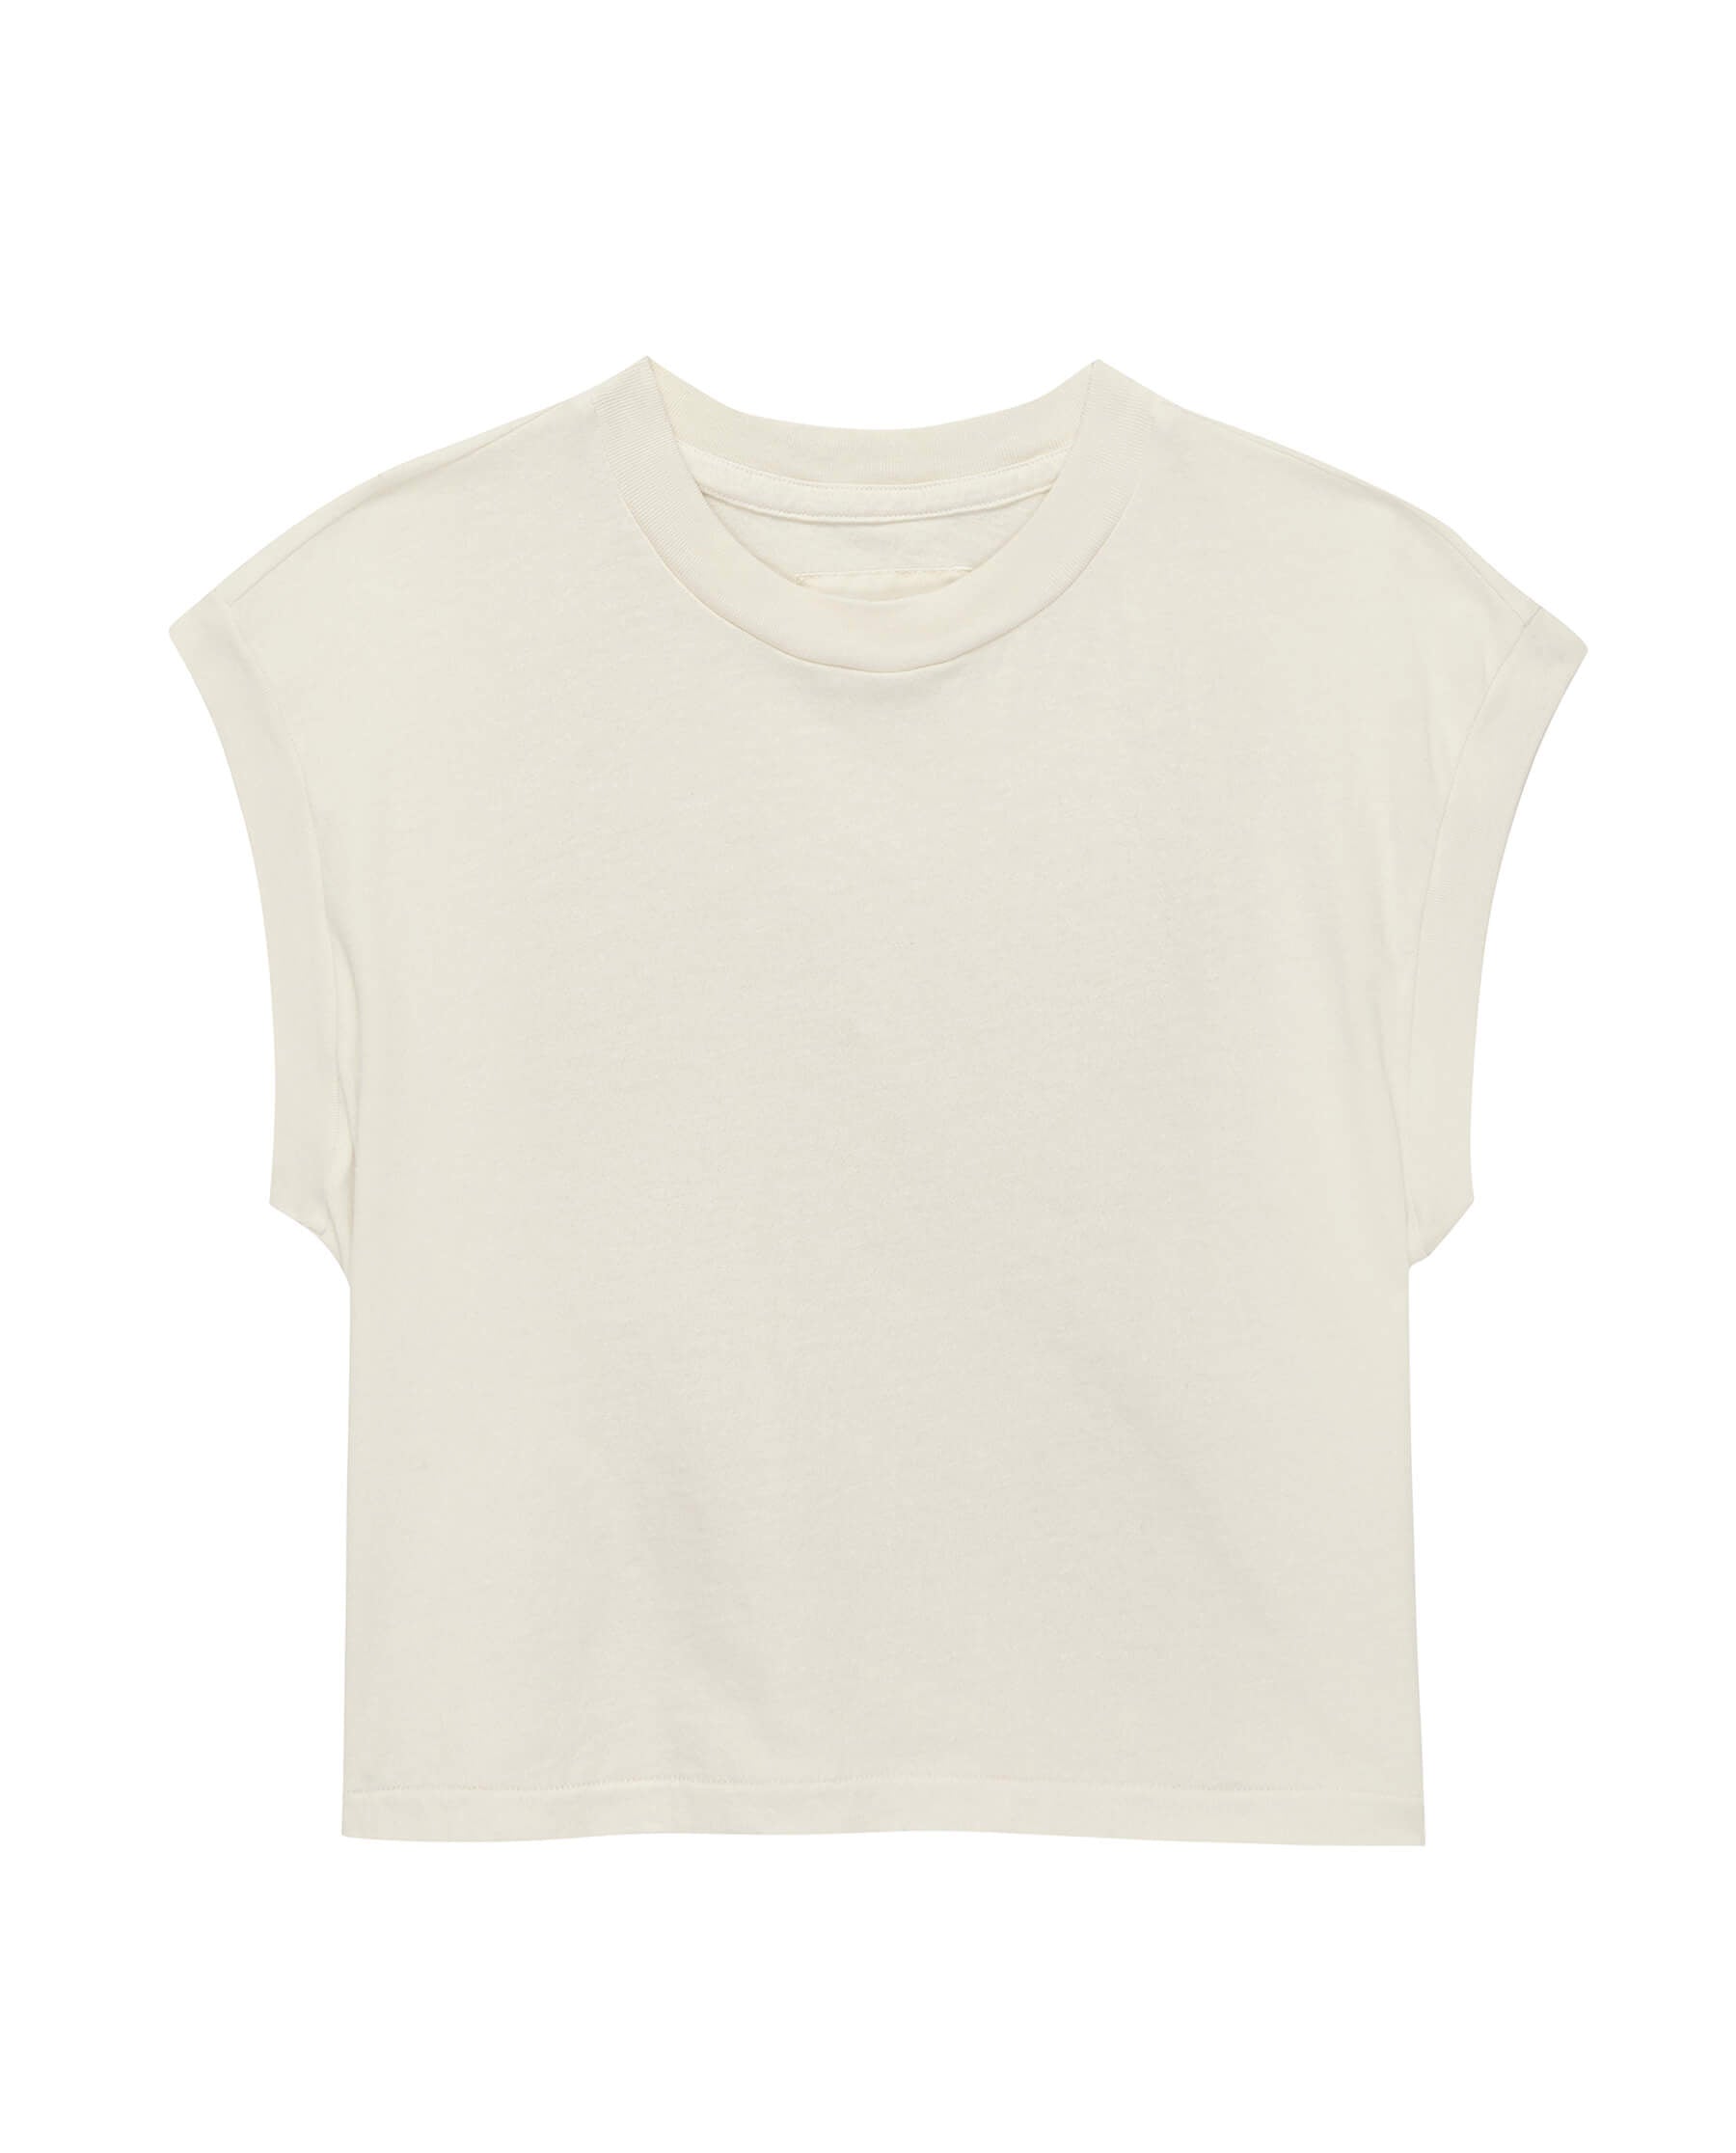 The Square Tee. -- Washed White